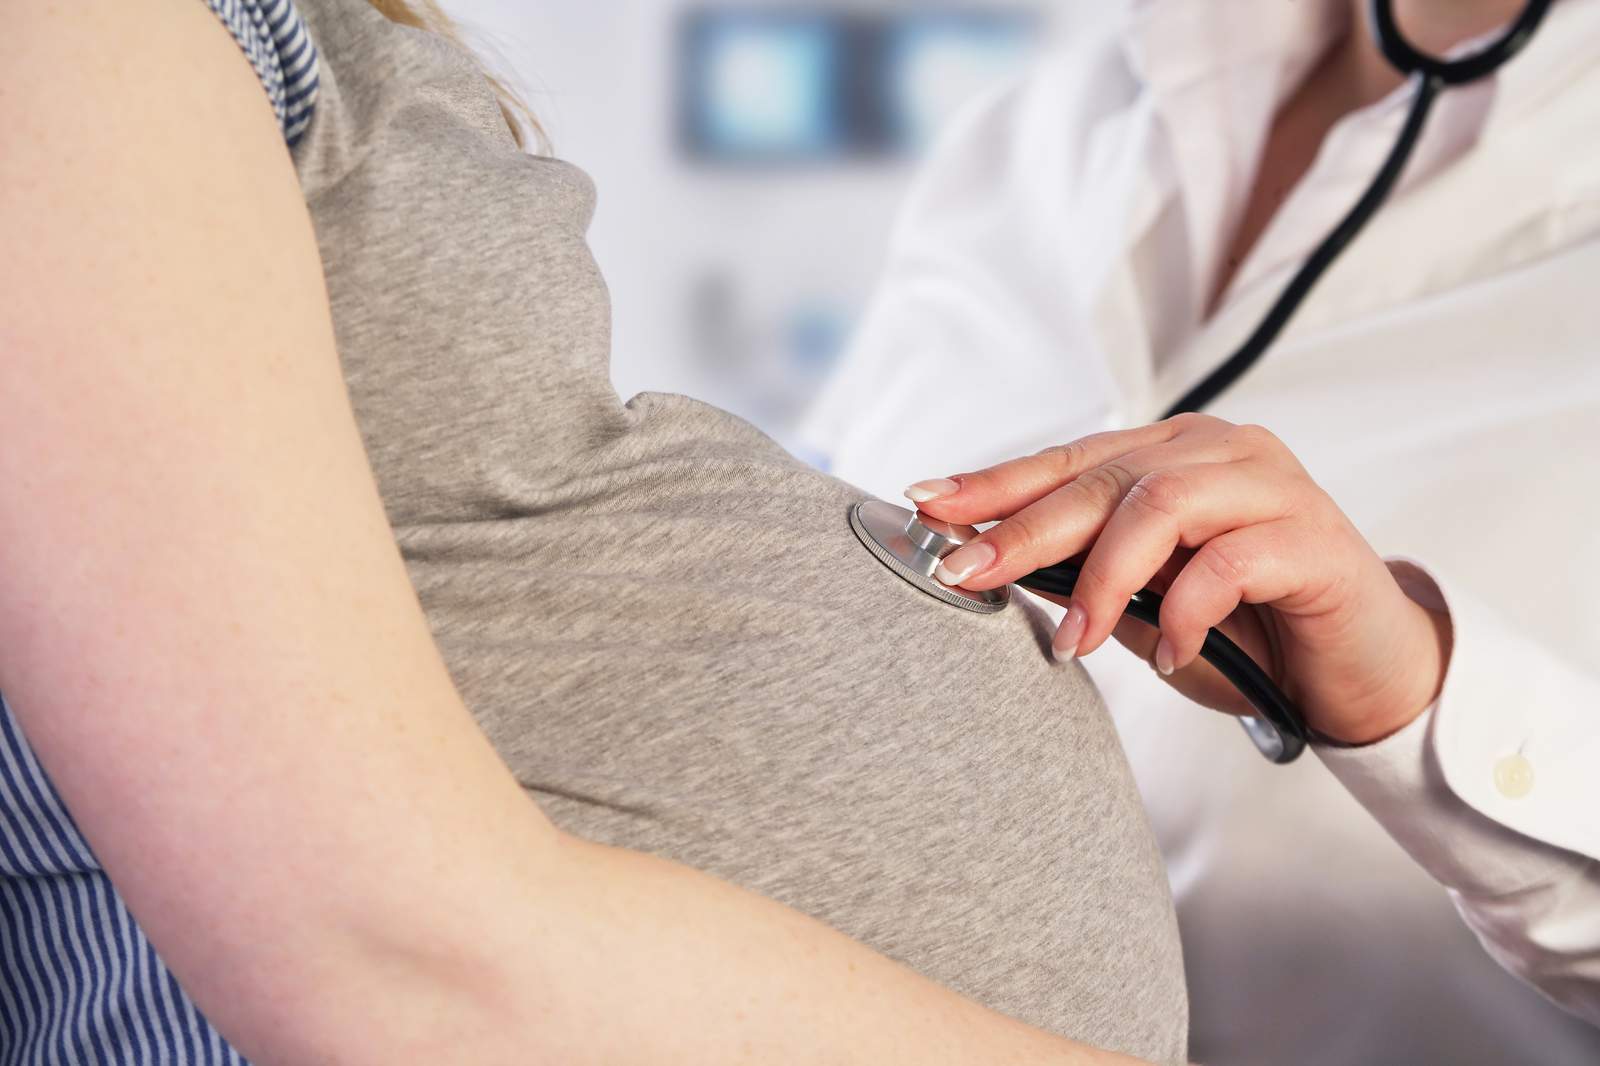 Coronavirus infection may make pregnant women more severely ill, CDC says